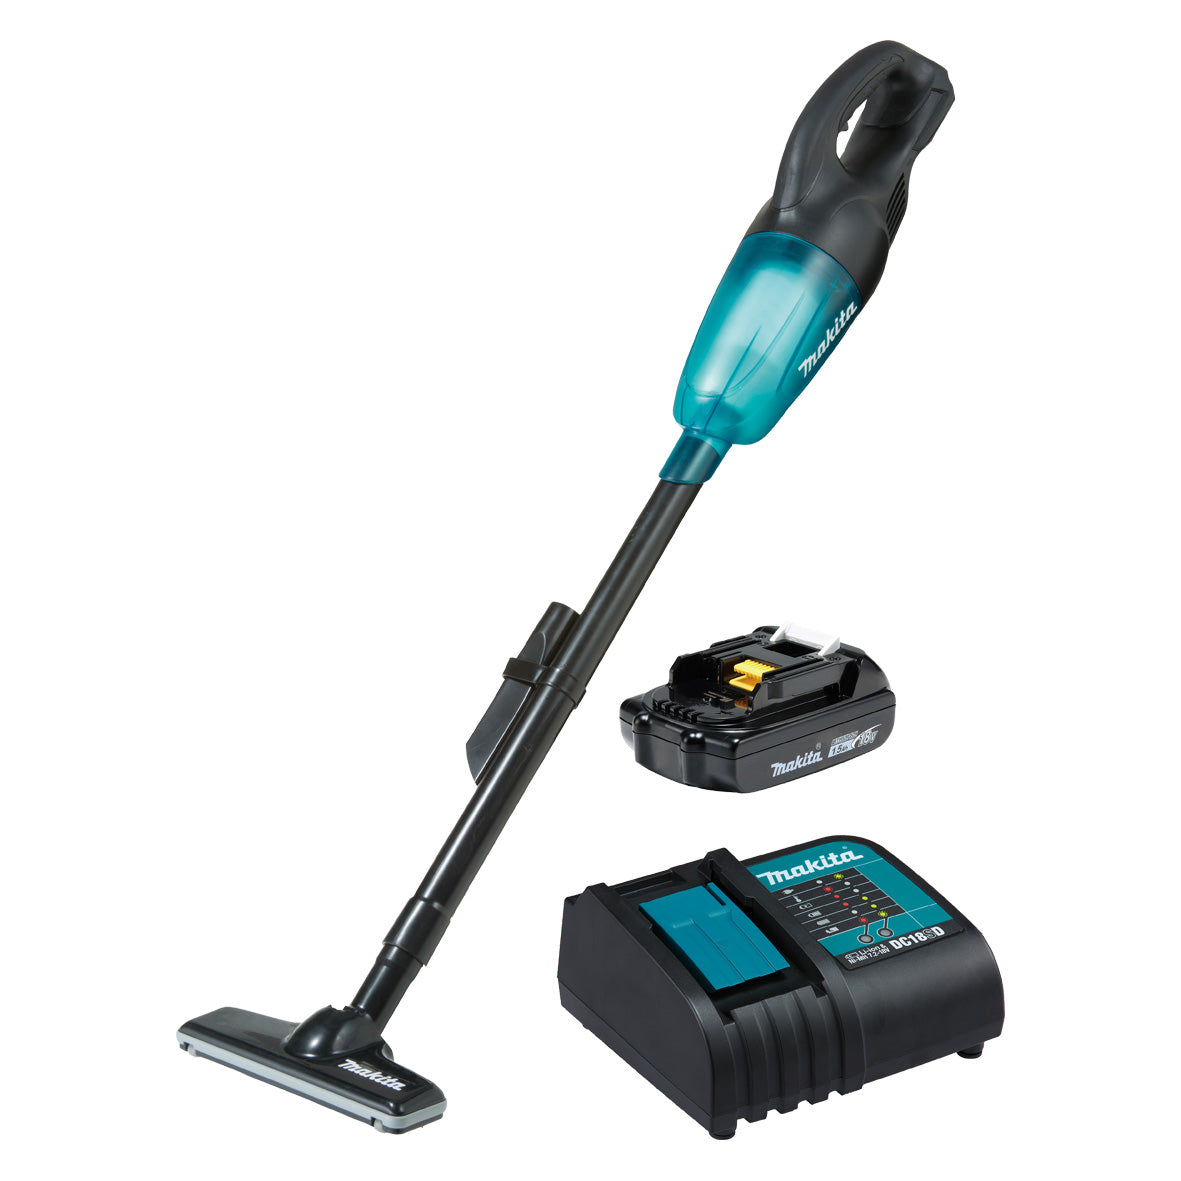 18V 1.5Ah Vacuum Cleaner Kit DCL180SYB by Makita